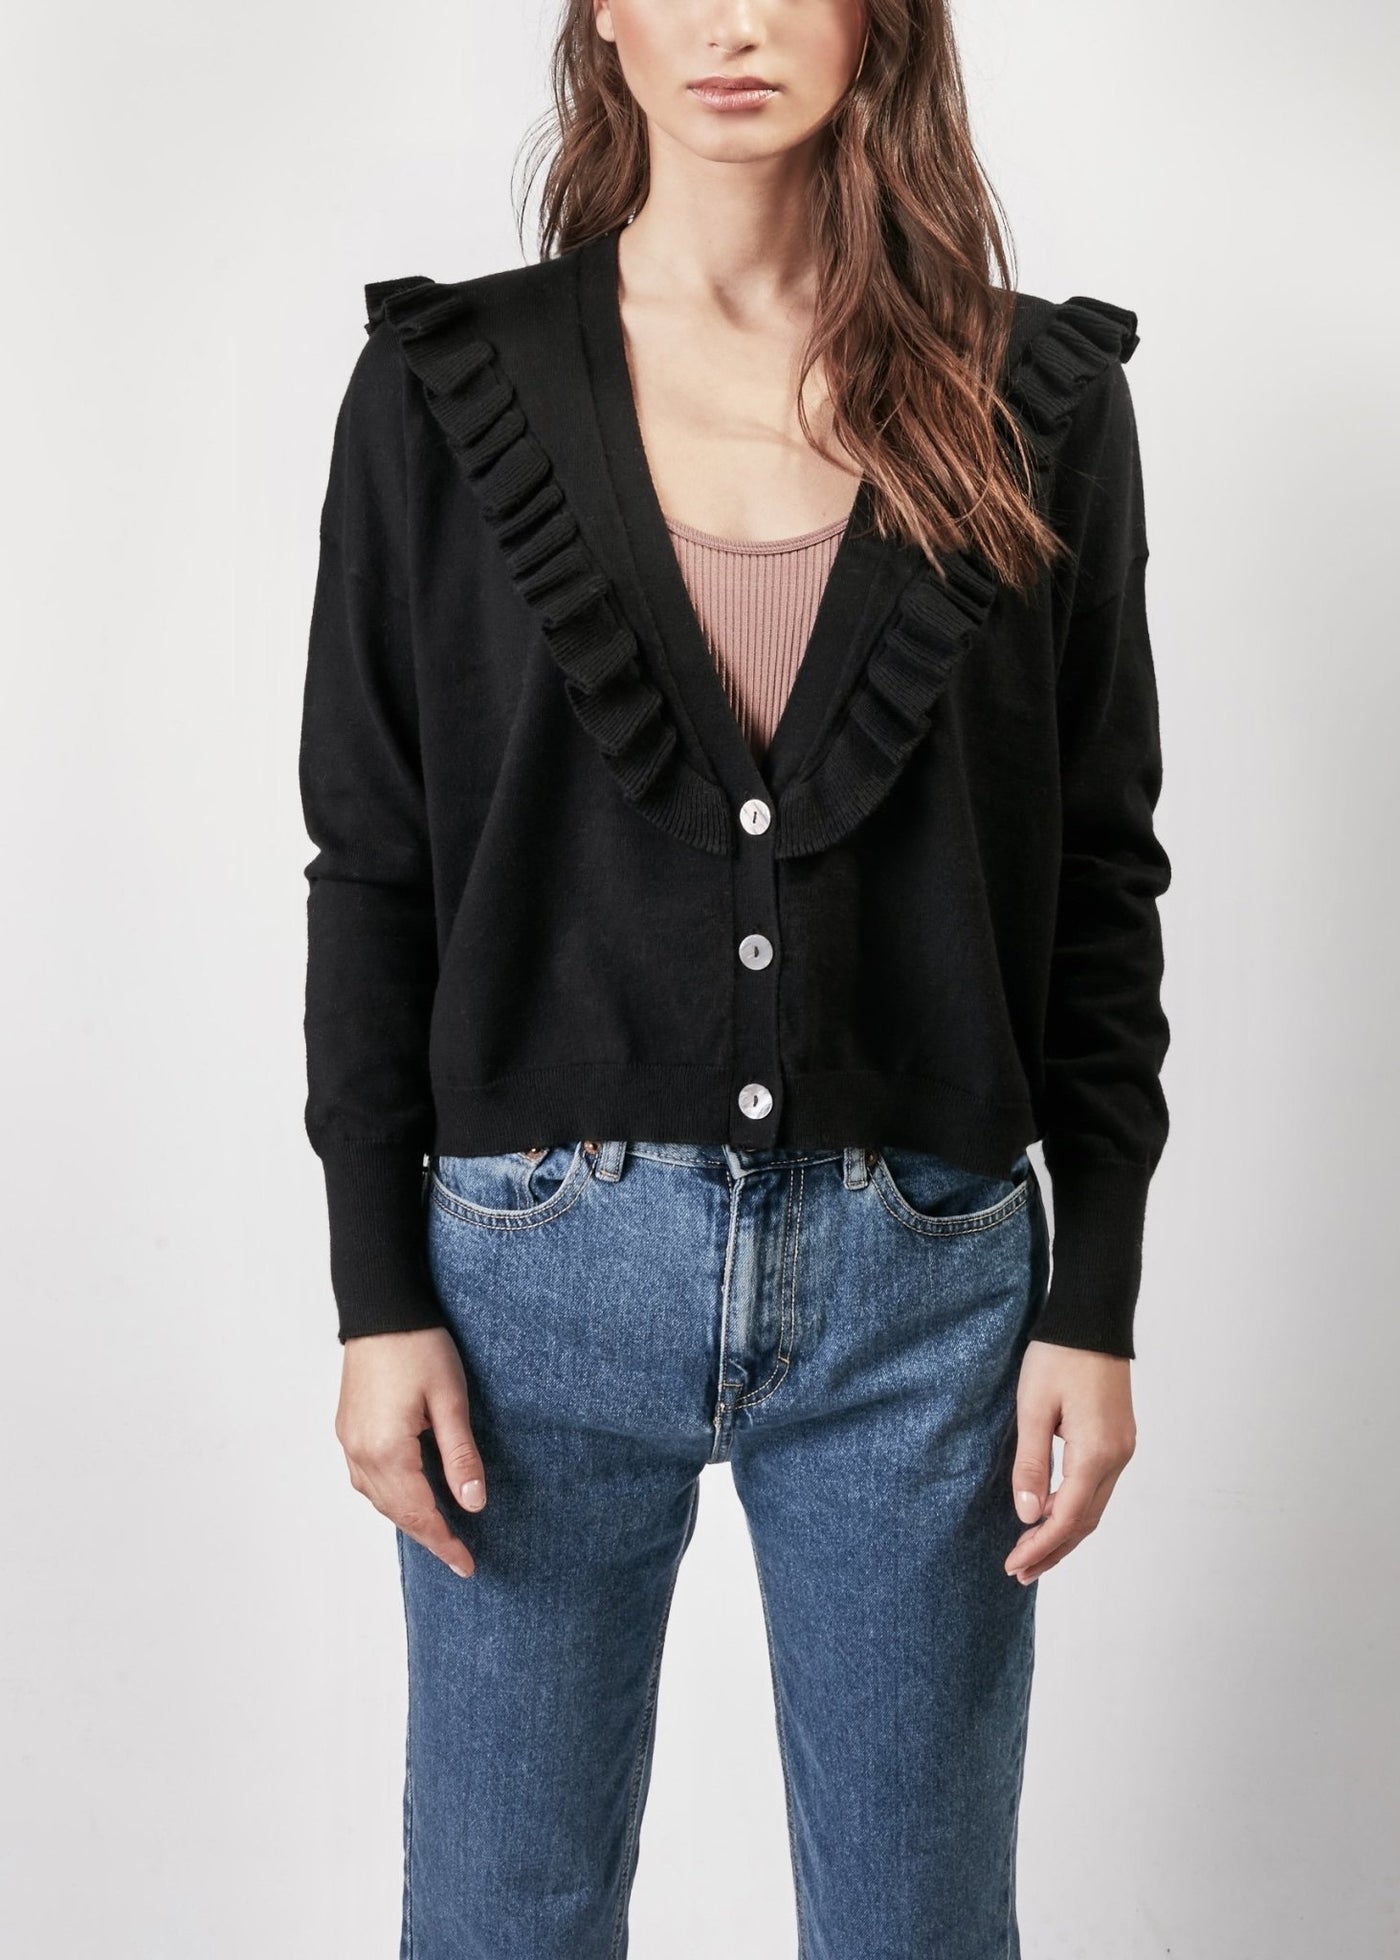 Victoria Cardigan - The Clothing LoungeLAM Clothing